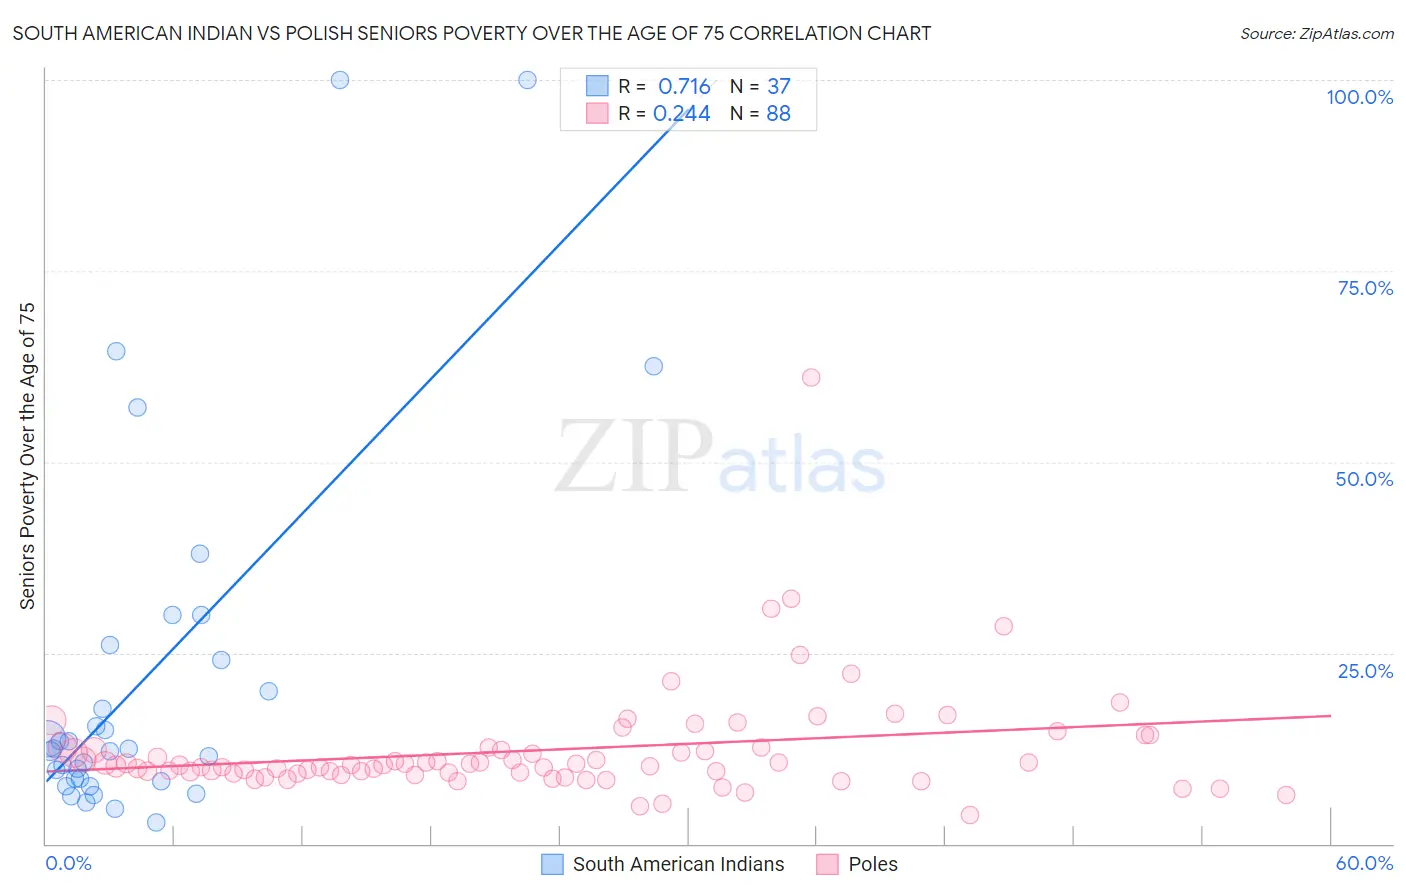 South American Indian vs Polish Seniors Poverty Over the Age of 75